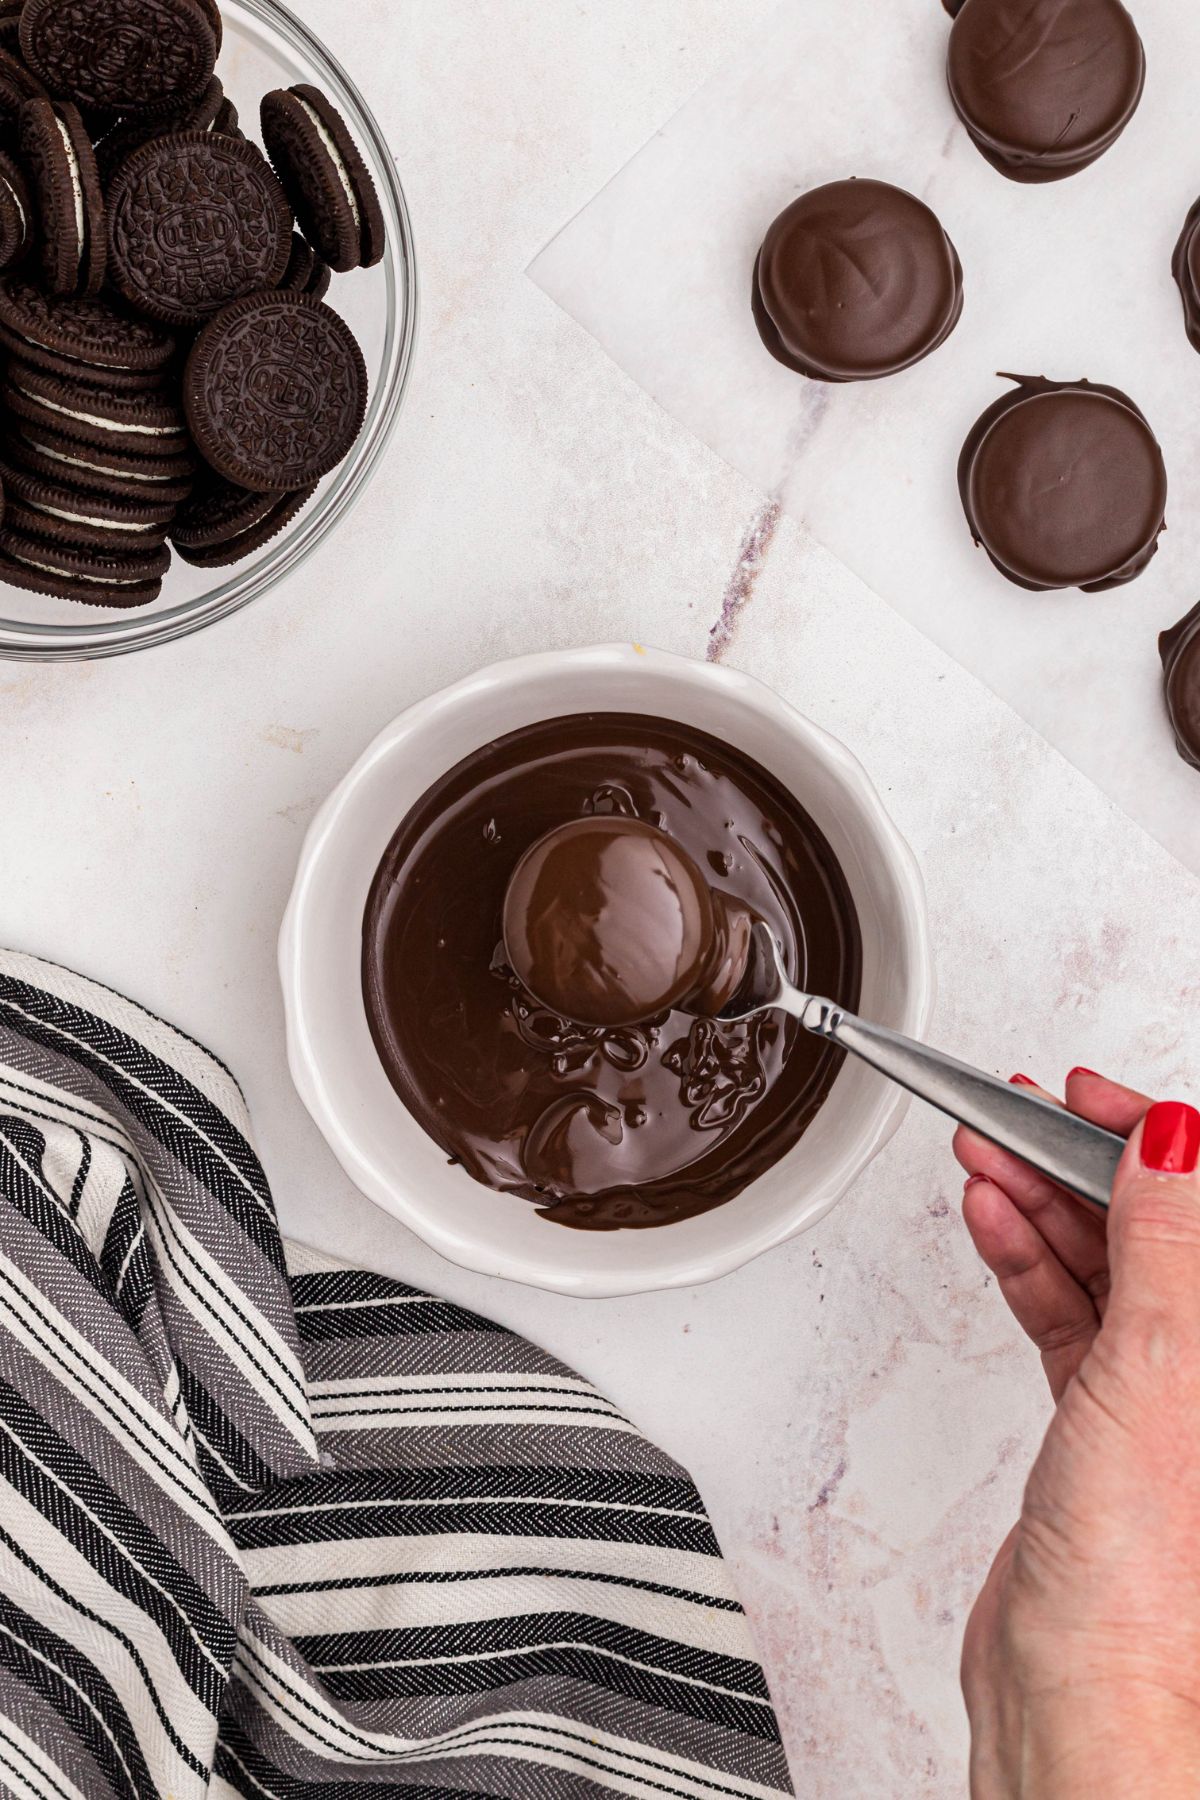 Oreo cookies being dipped in melted chocolate in a white bowl